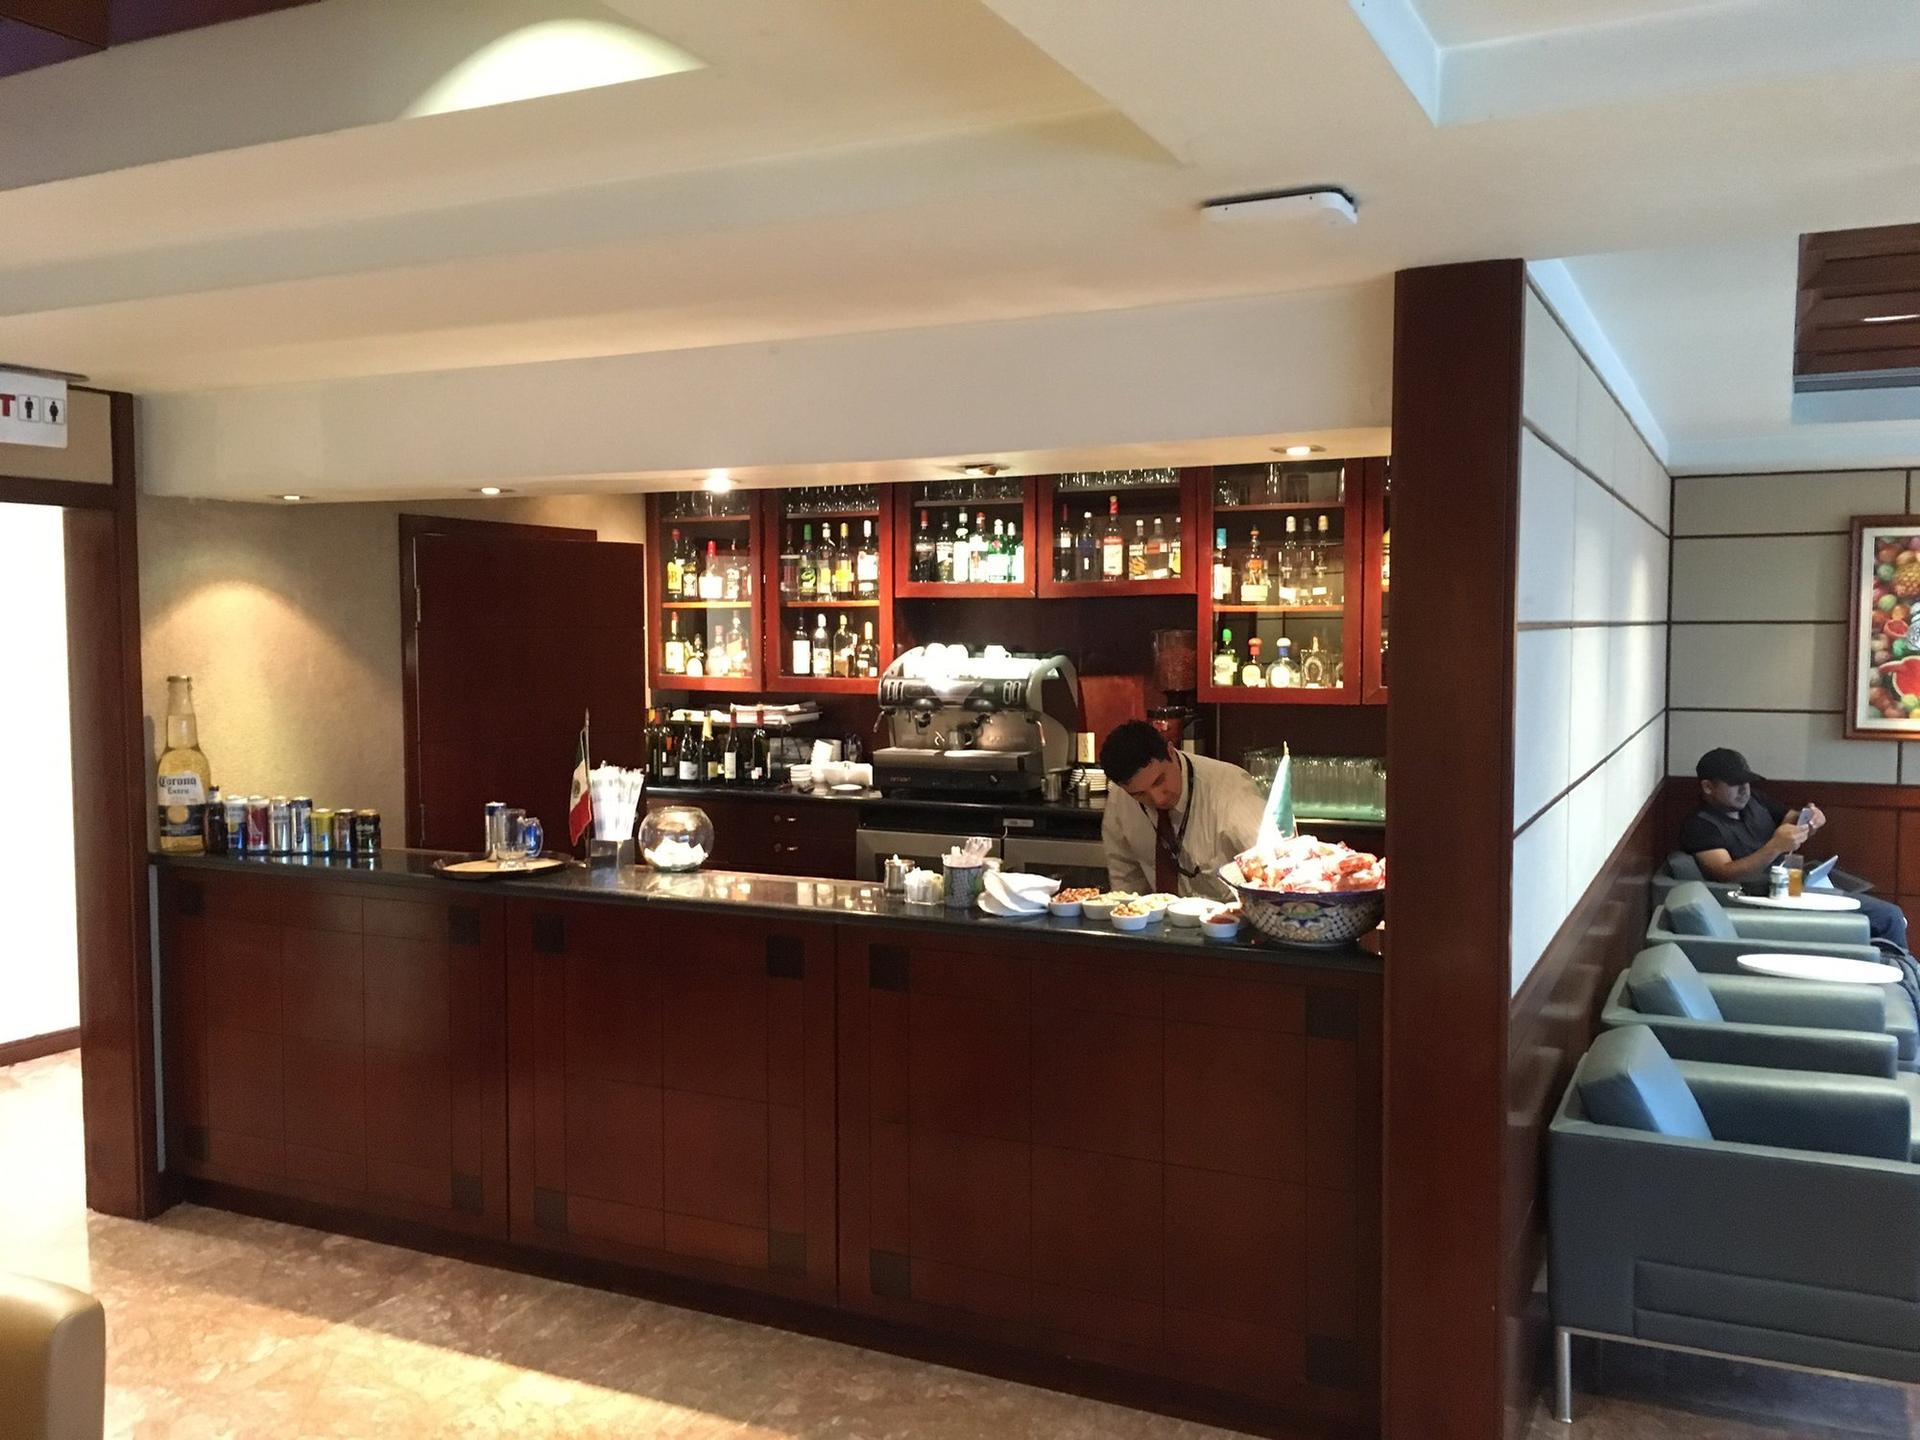 American Airlines Admirals Club image 16 of 32